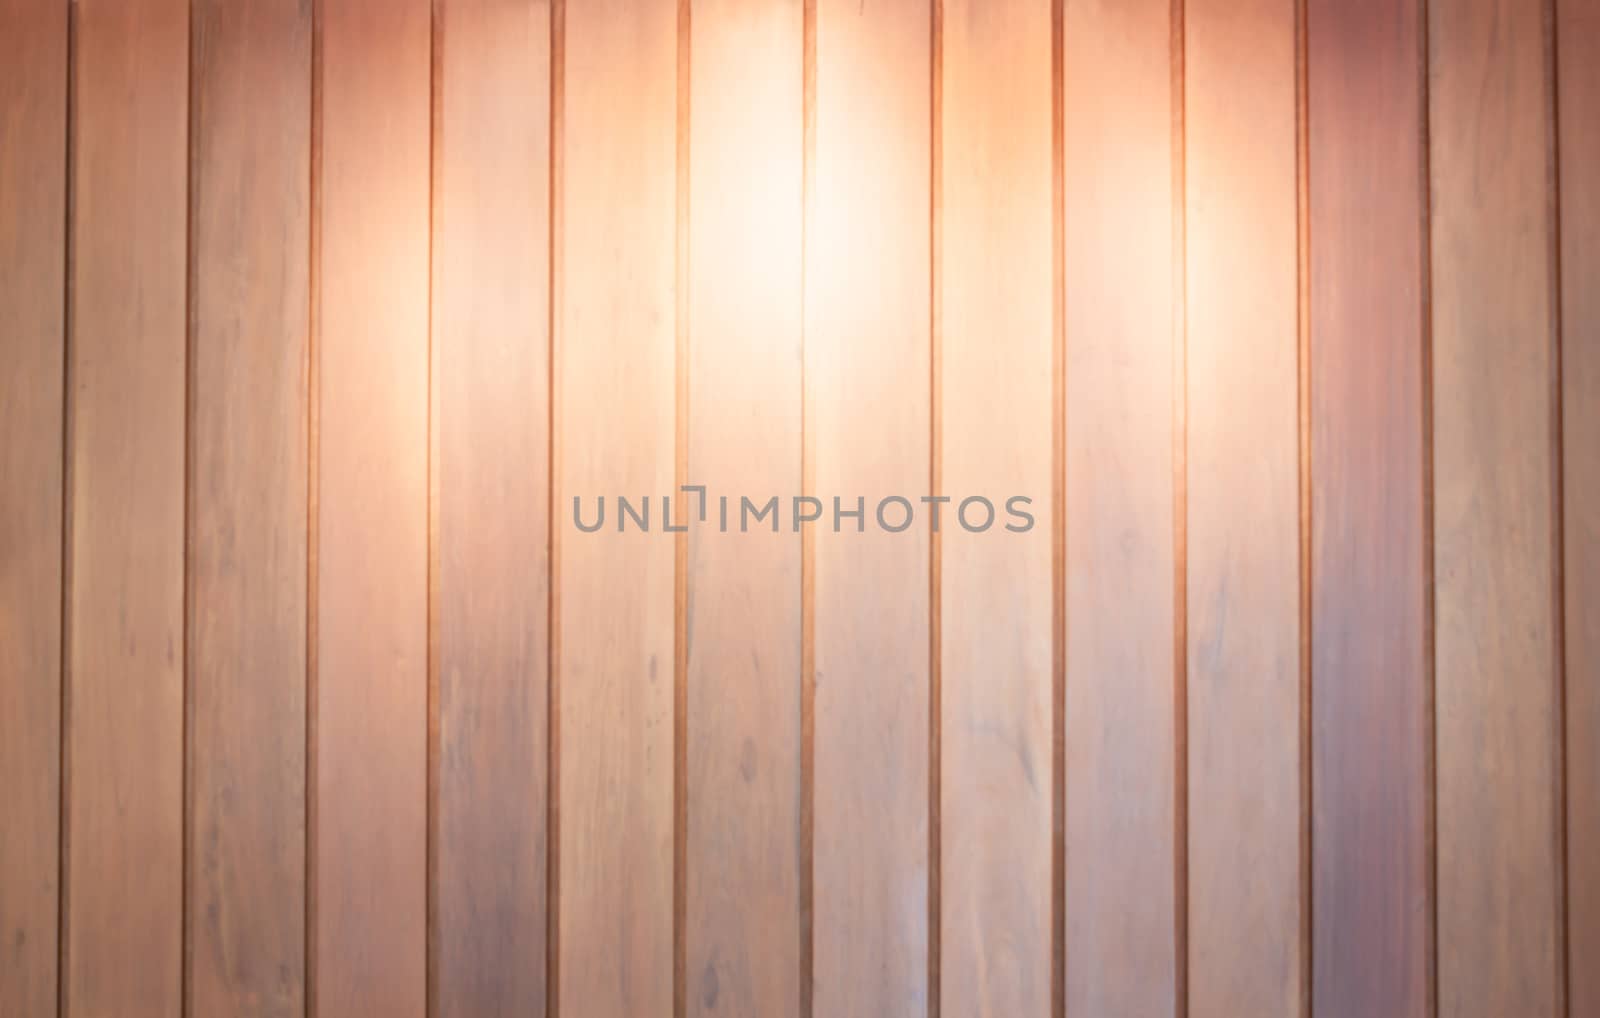 Spot light on wooden wall background, stock photo